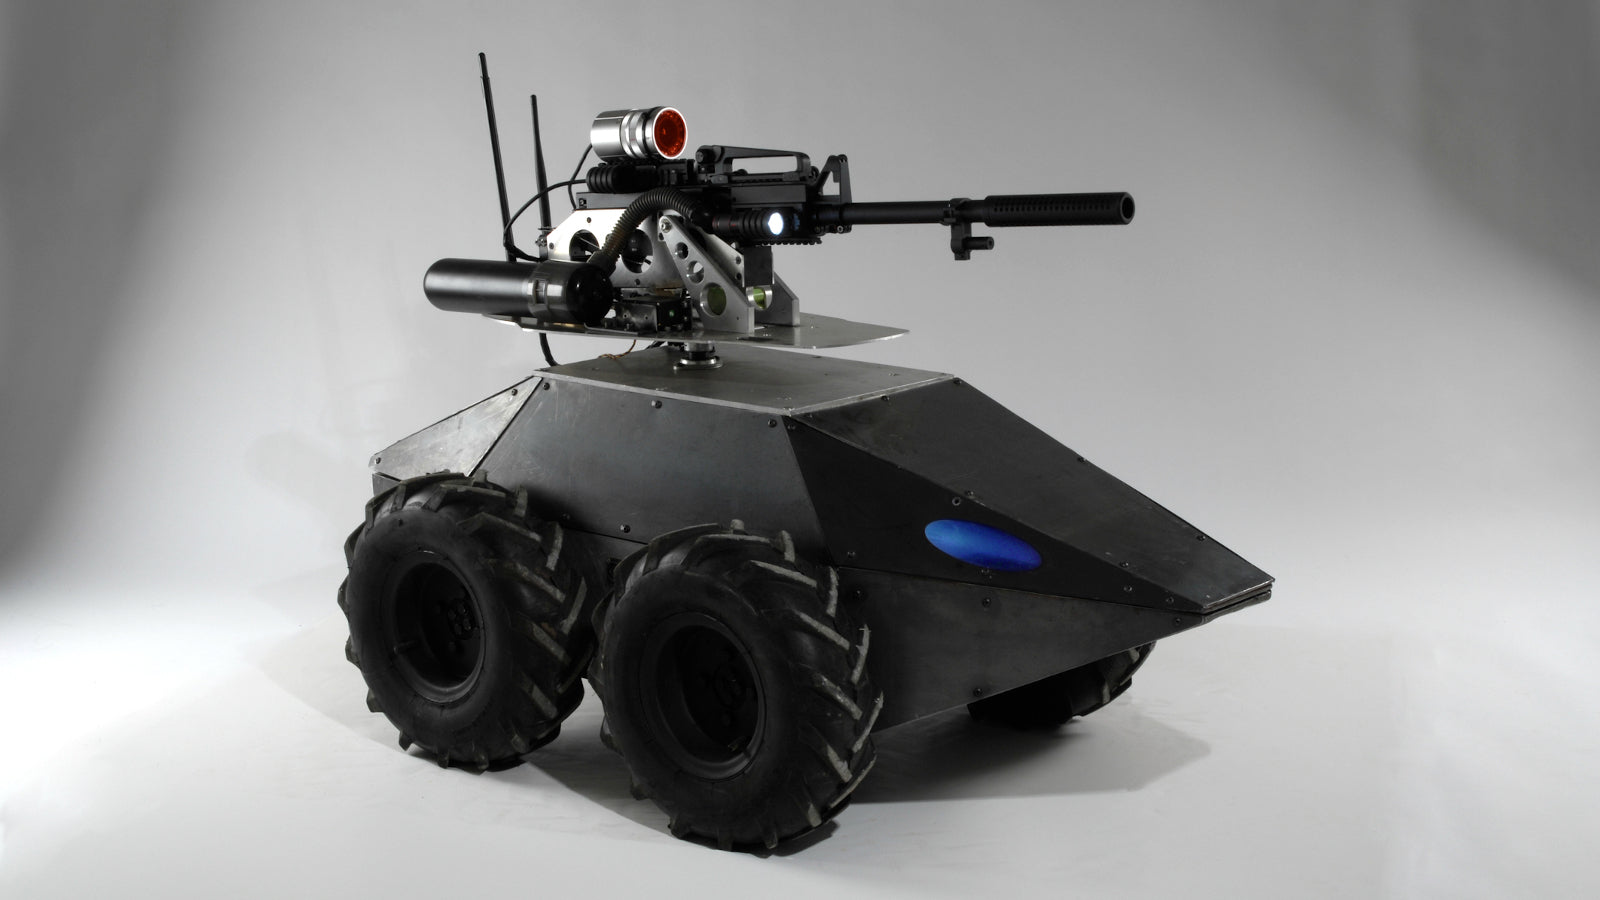 The Cutting Edge of Defense Technology: The Most Advanced Defense Robots in the World